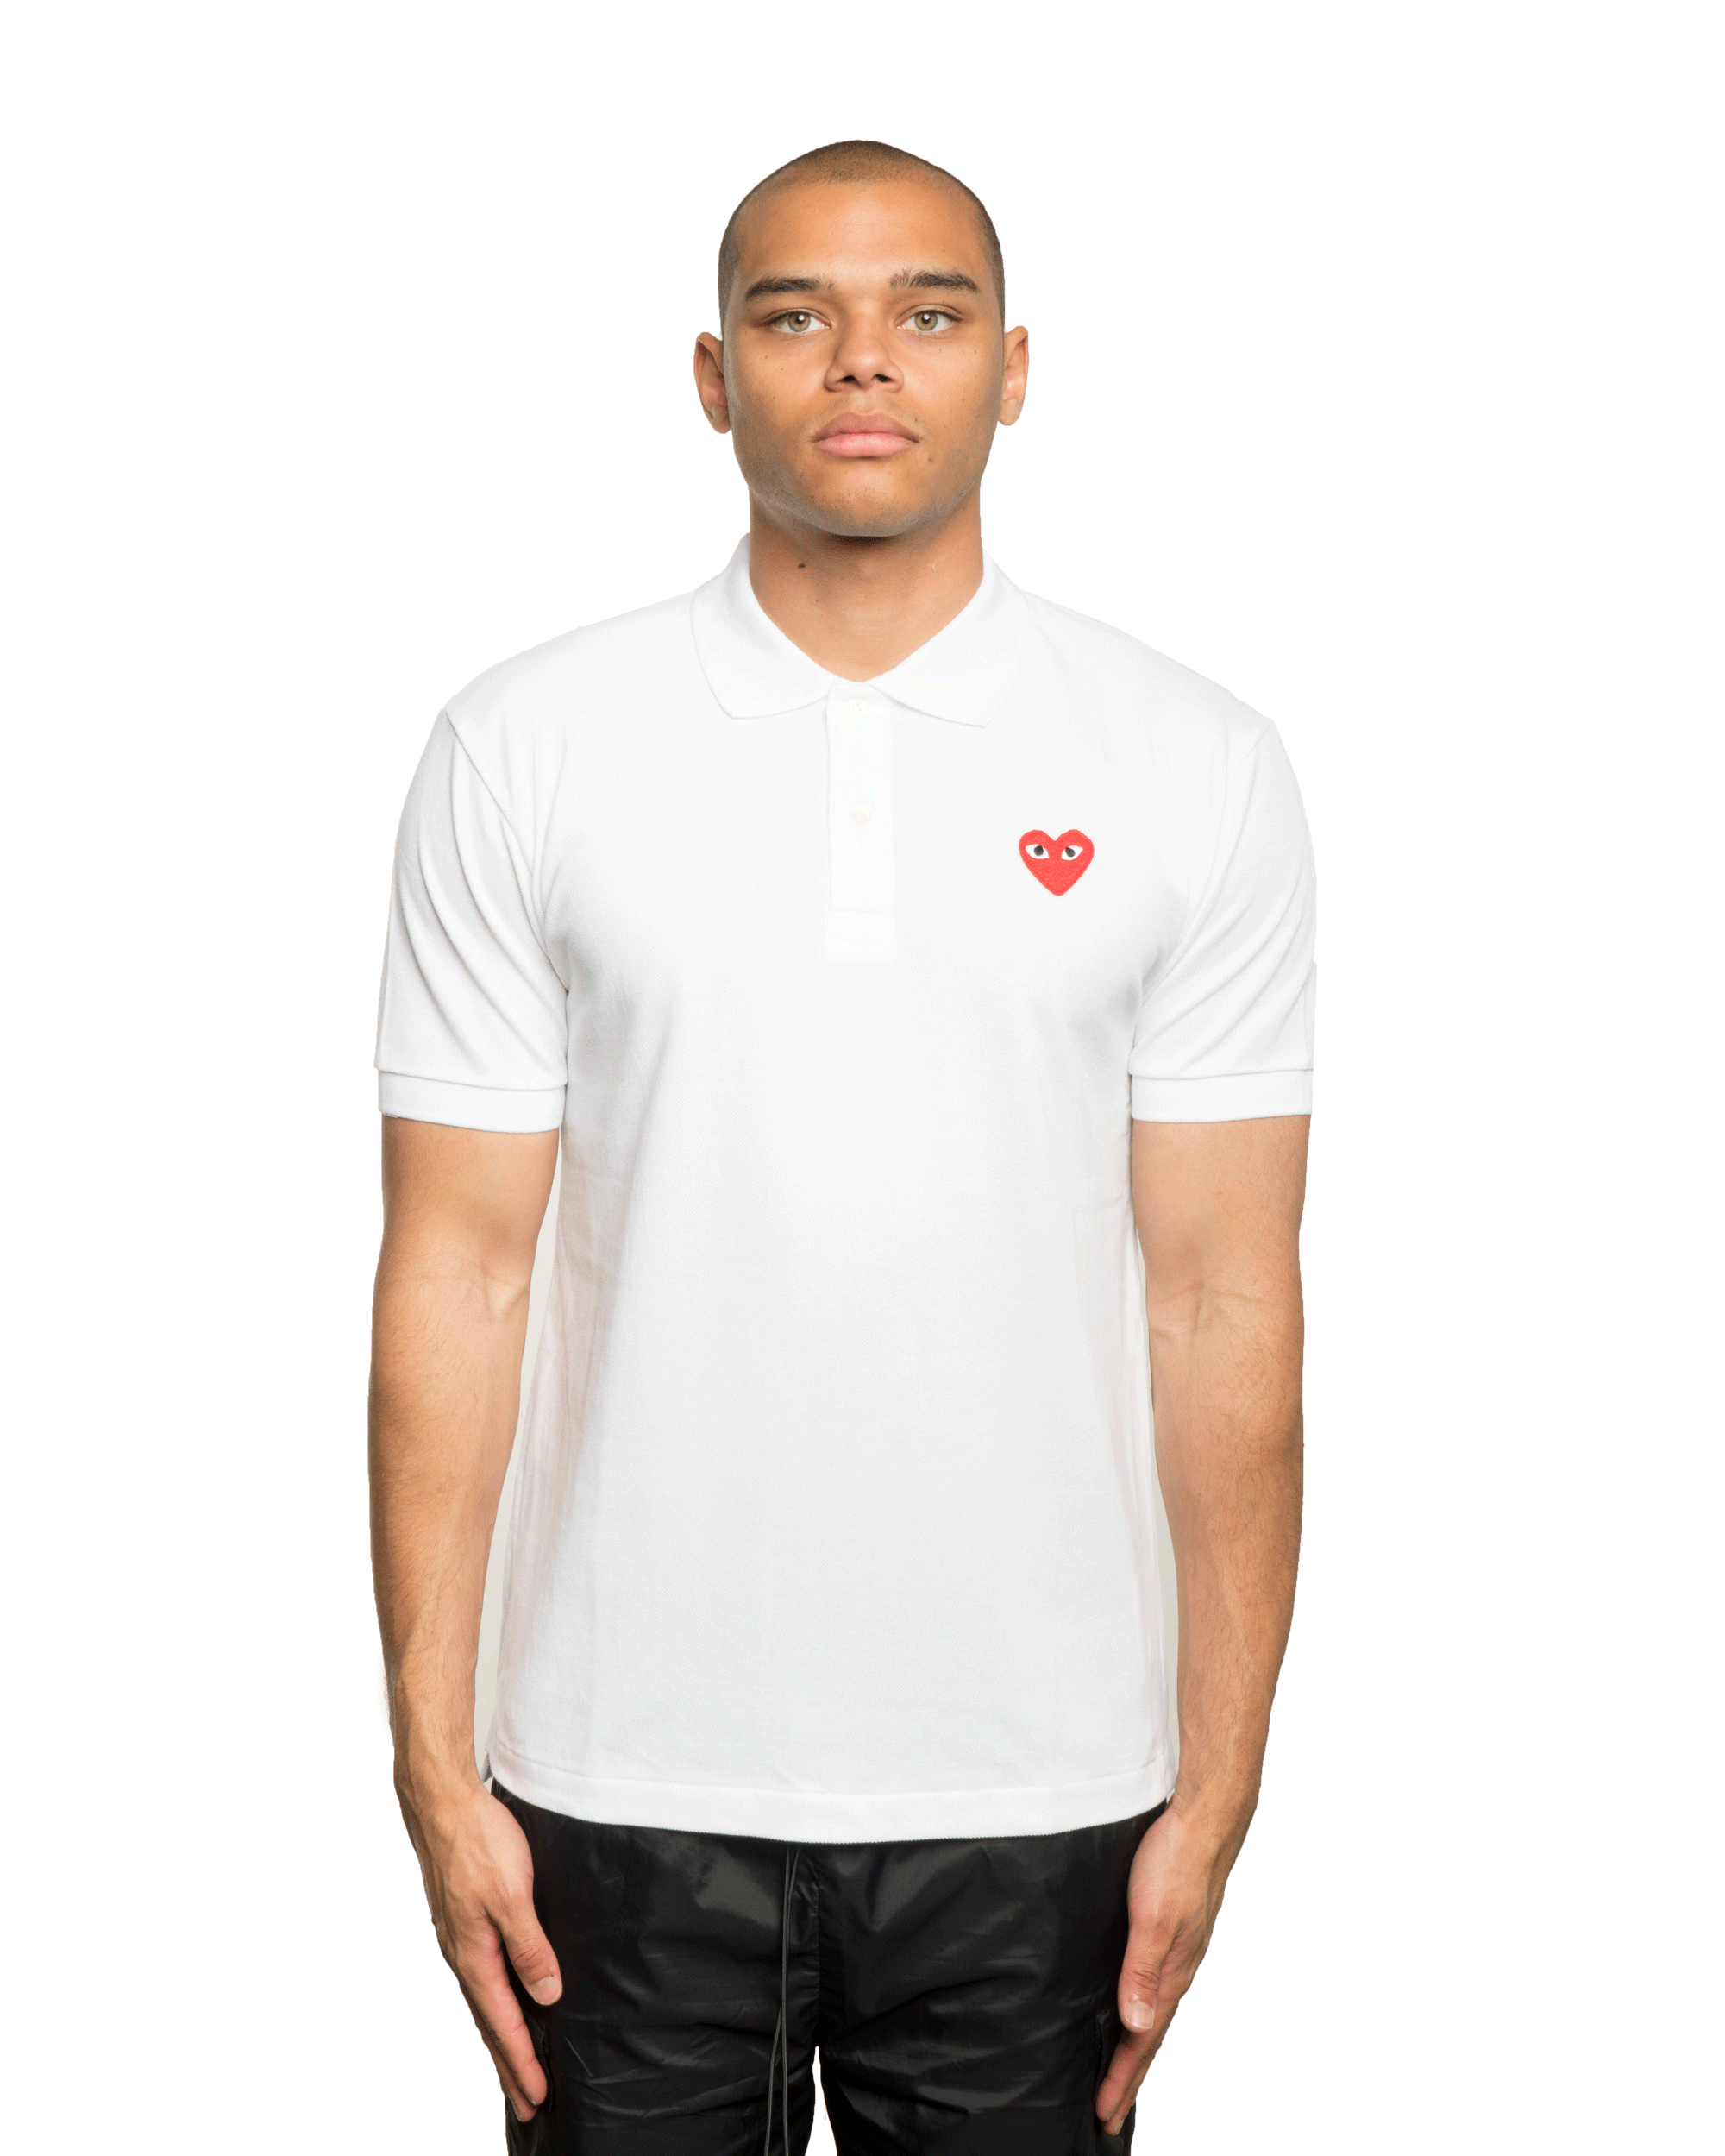 CDG Red Heart Patch Shirt White